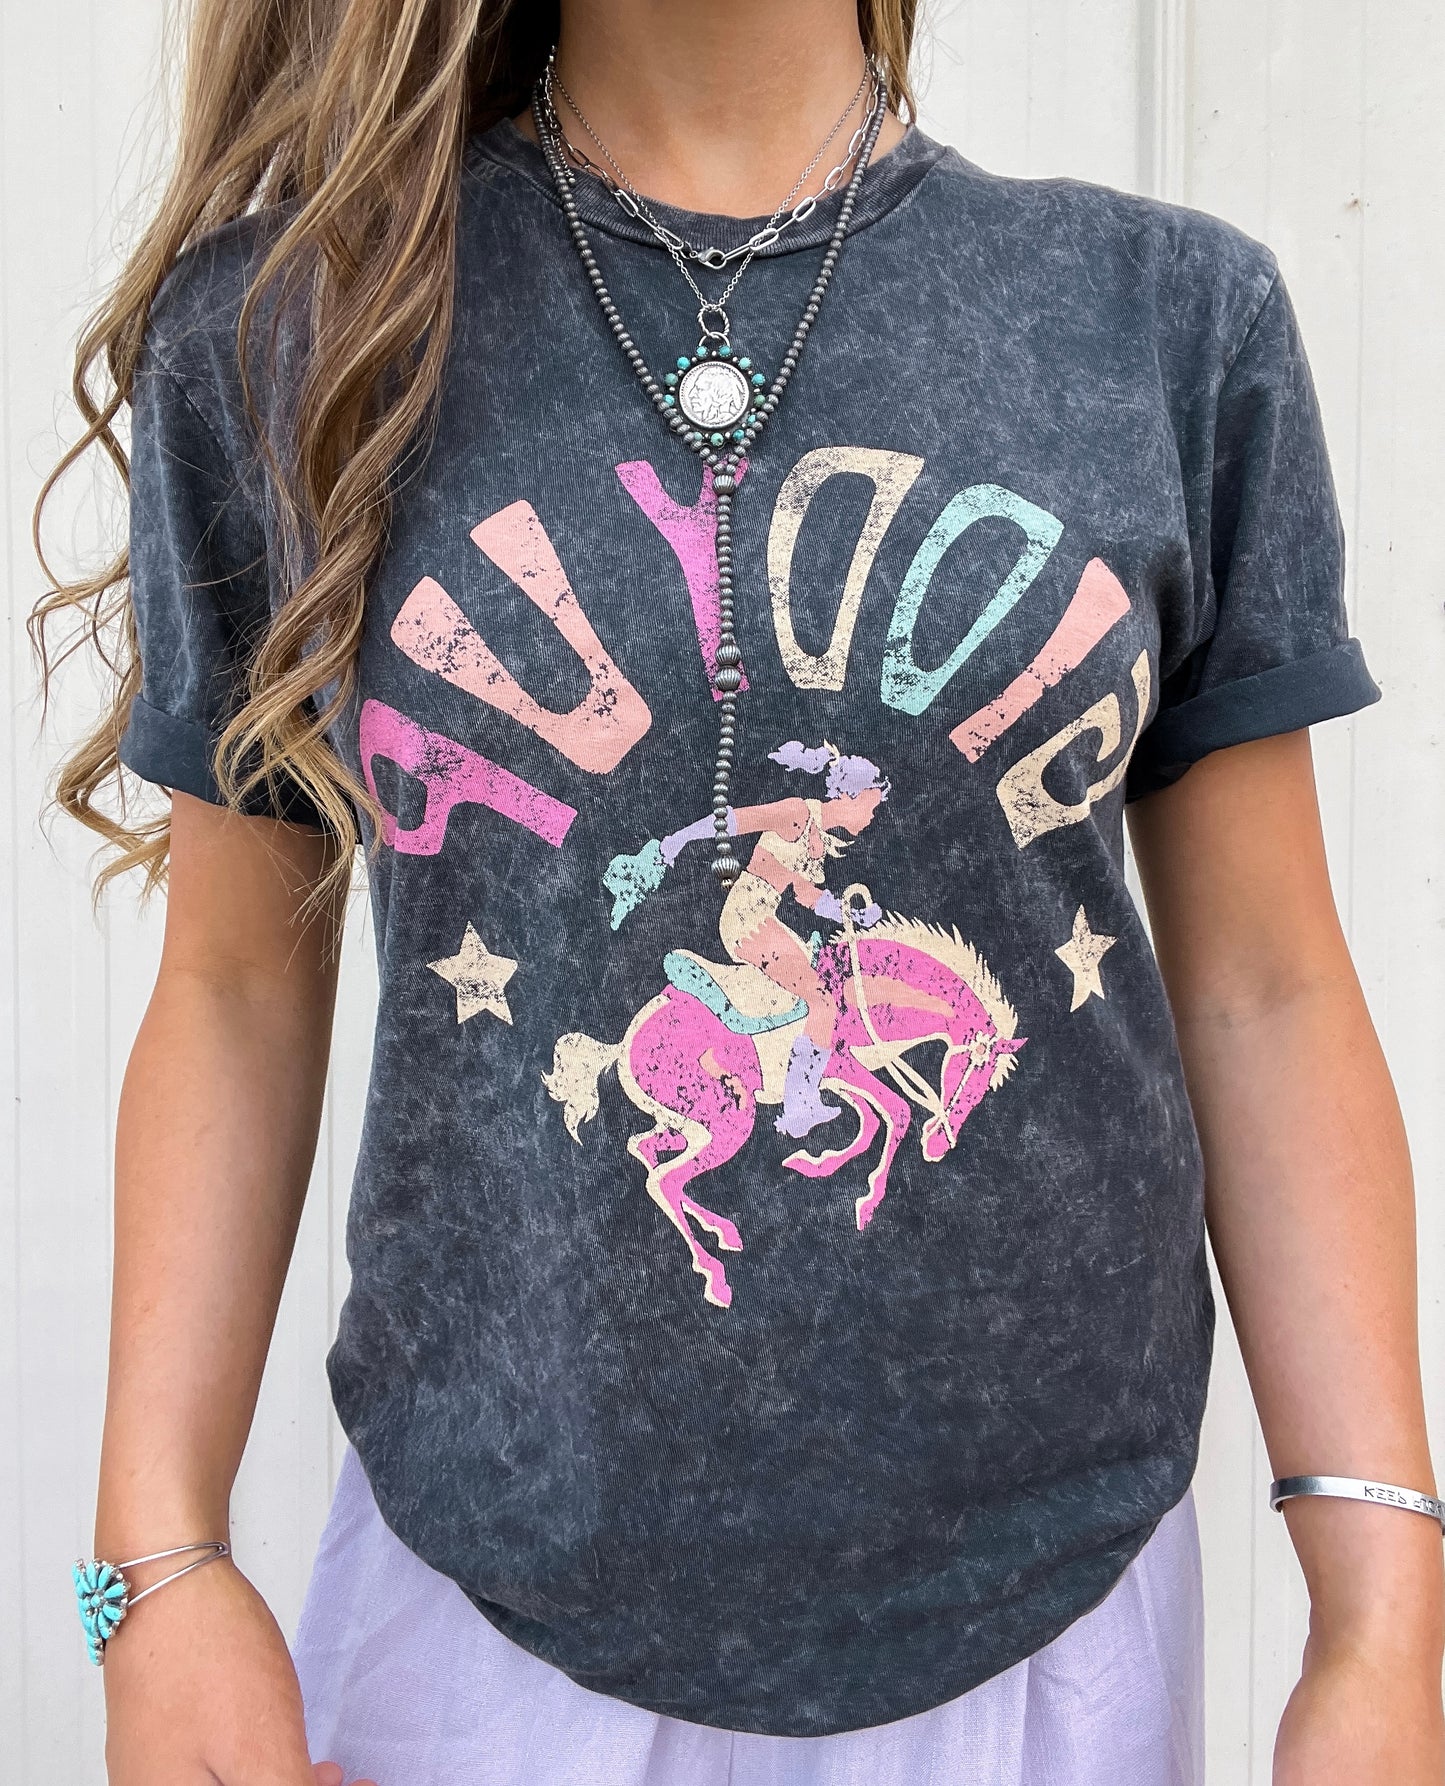 The Giddy Up Tee